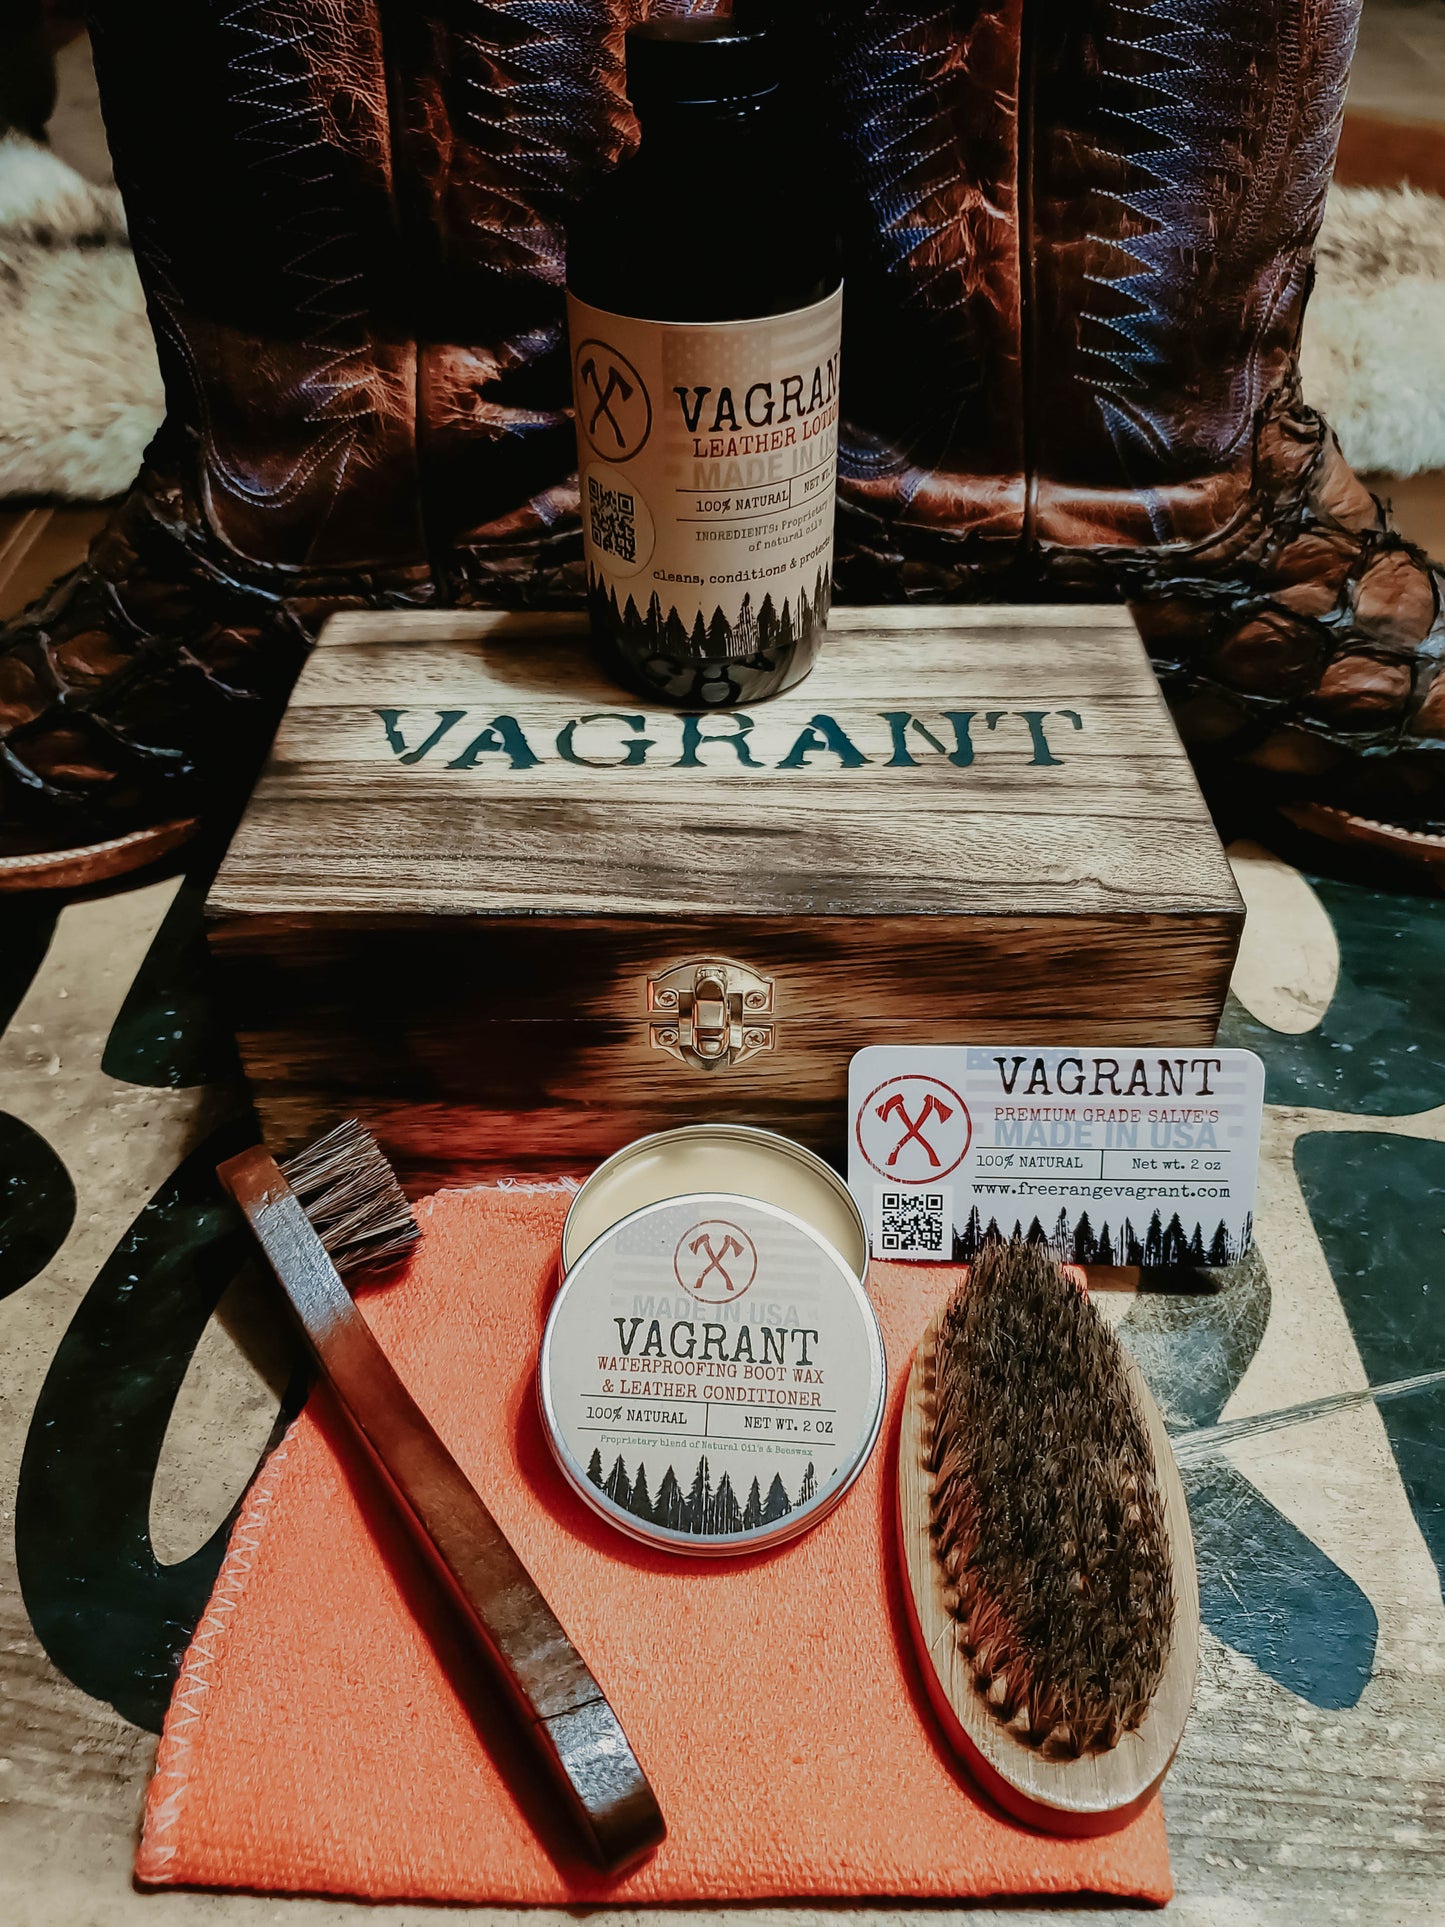 Vagrant Leather Lotion